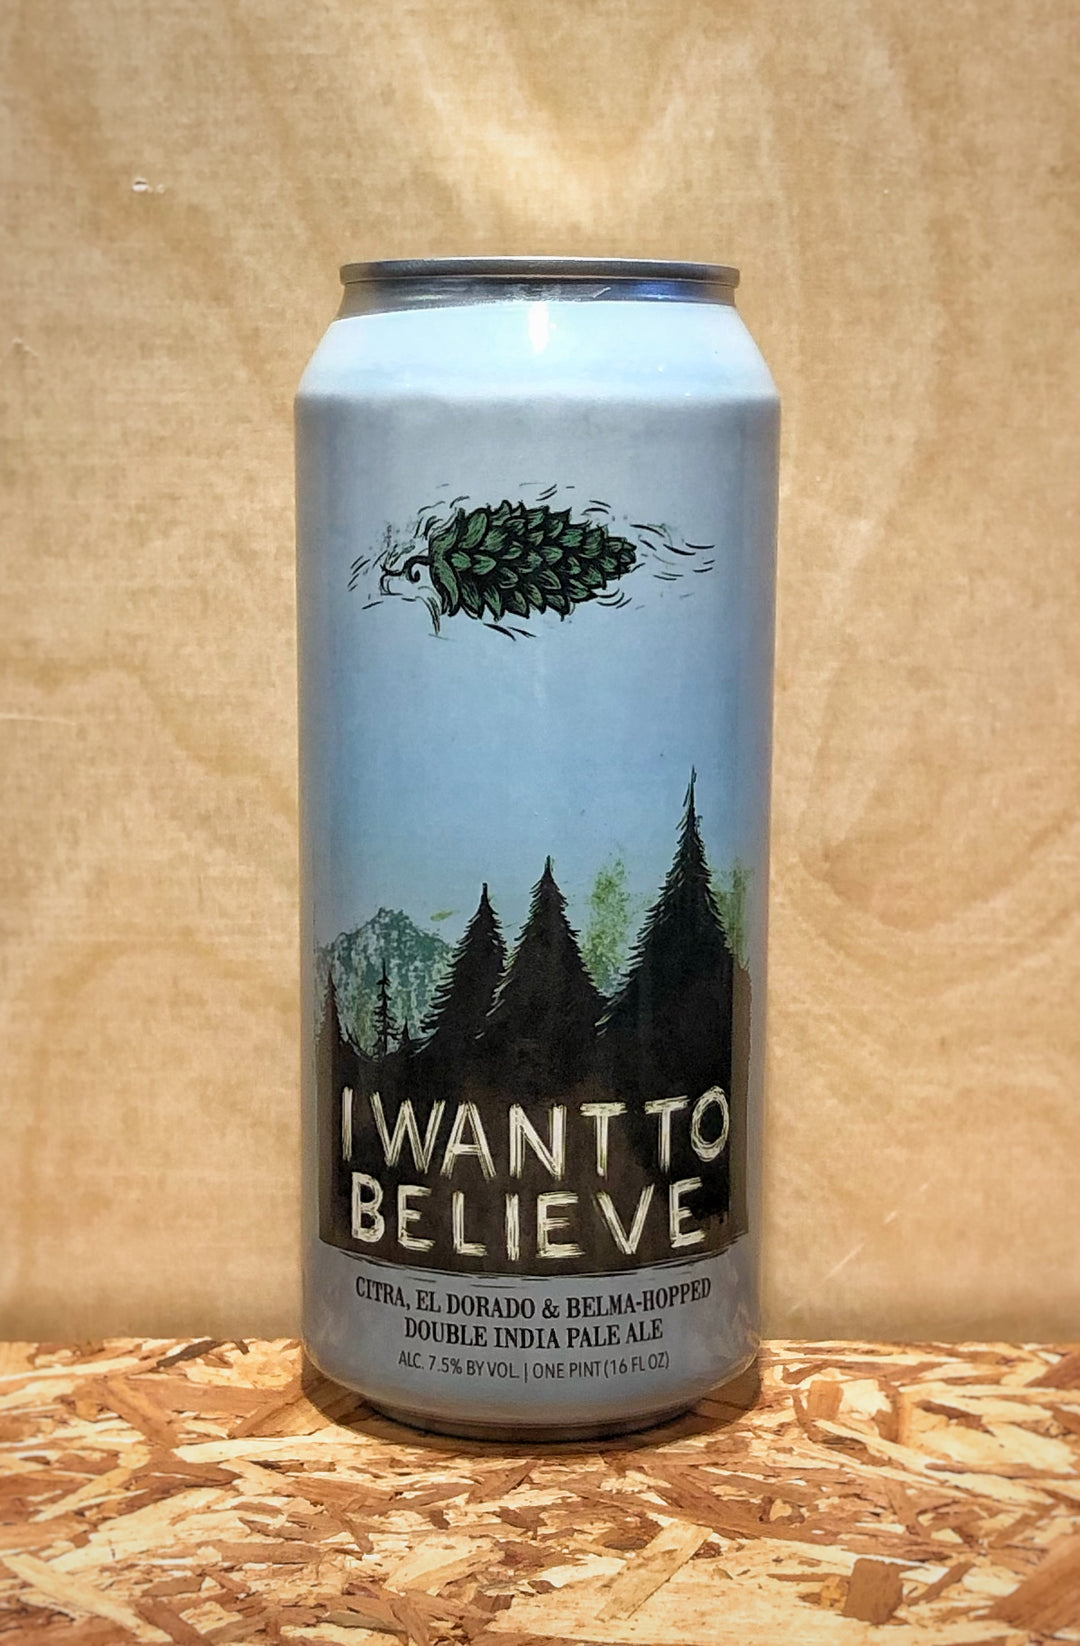 Hop Butcher For the World 'I Want to Believe' Citra, El Dorado, & Bella-Hopped Double India Pale Ale (Chicago, IL)